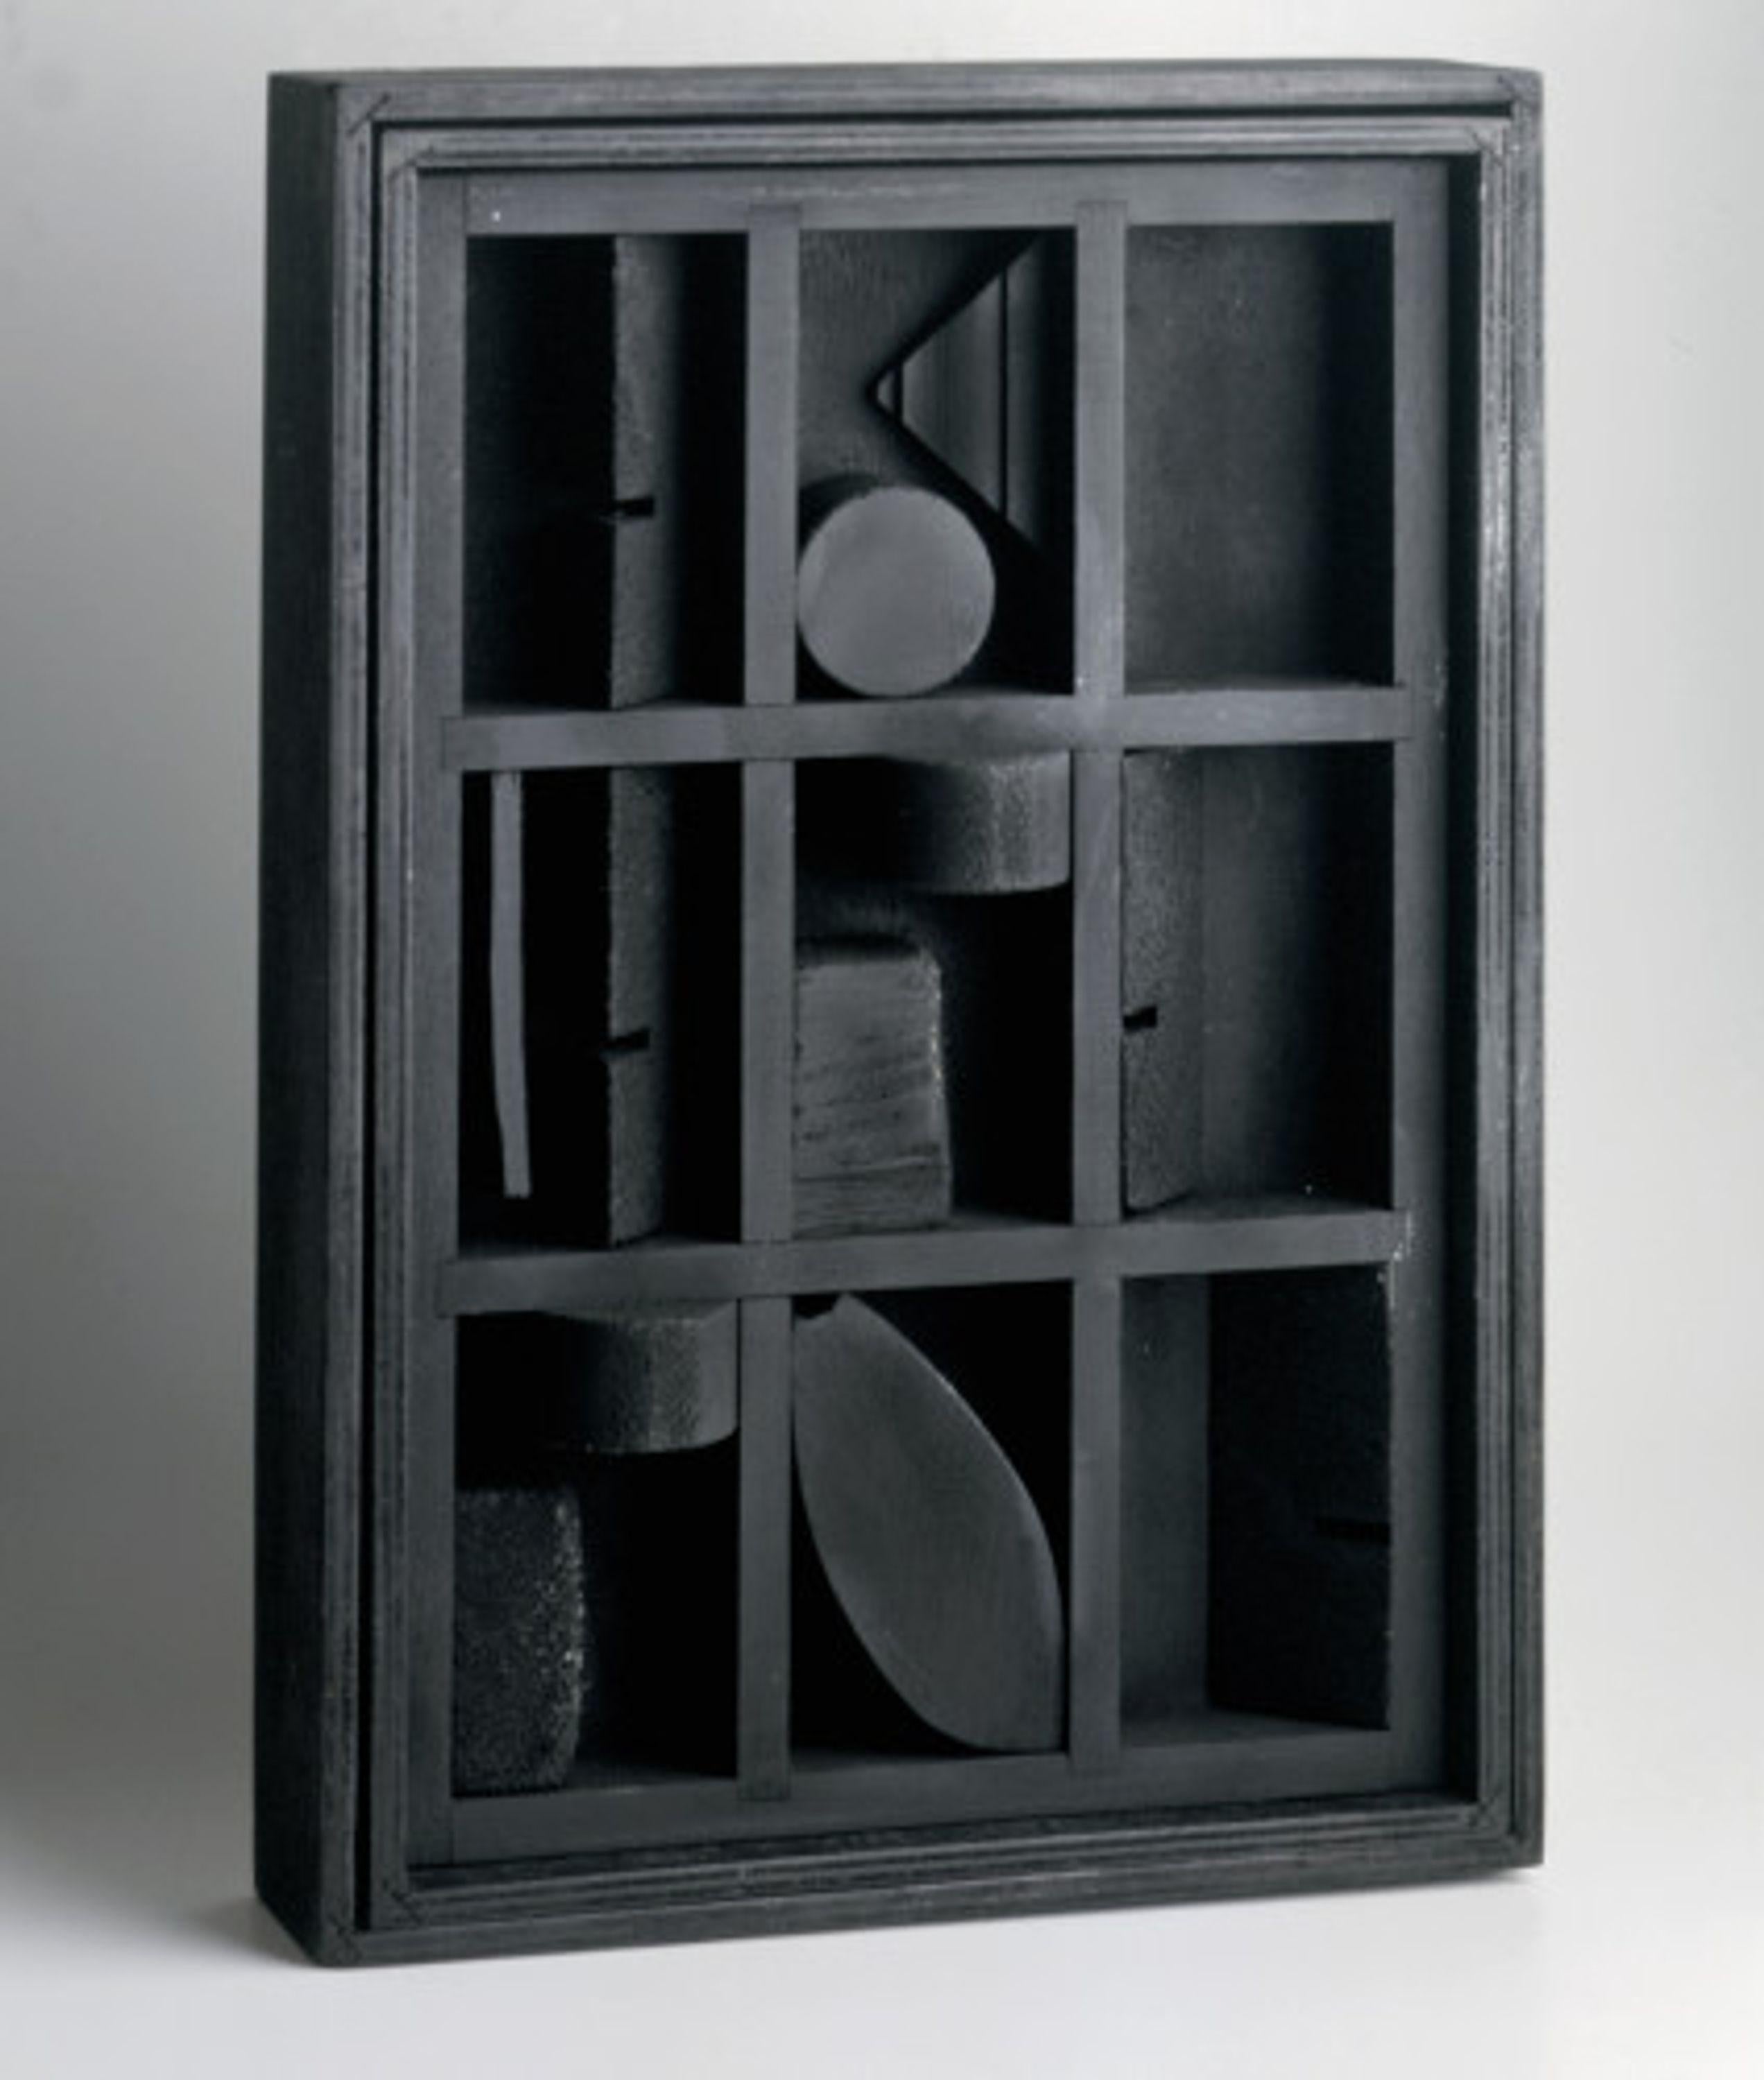 Winter chord - Sculpture by Louise Nevelson